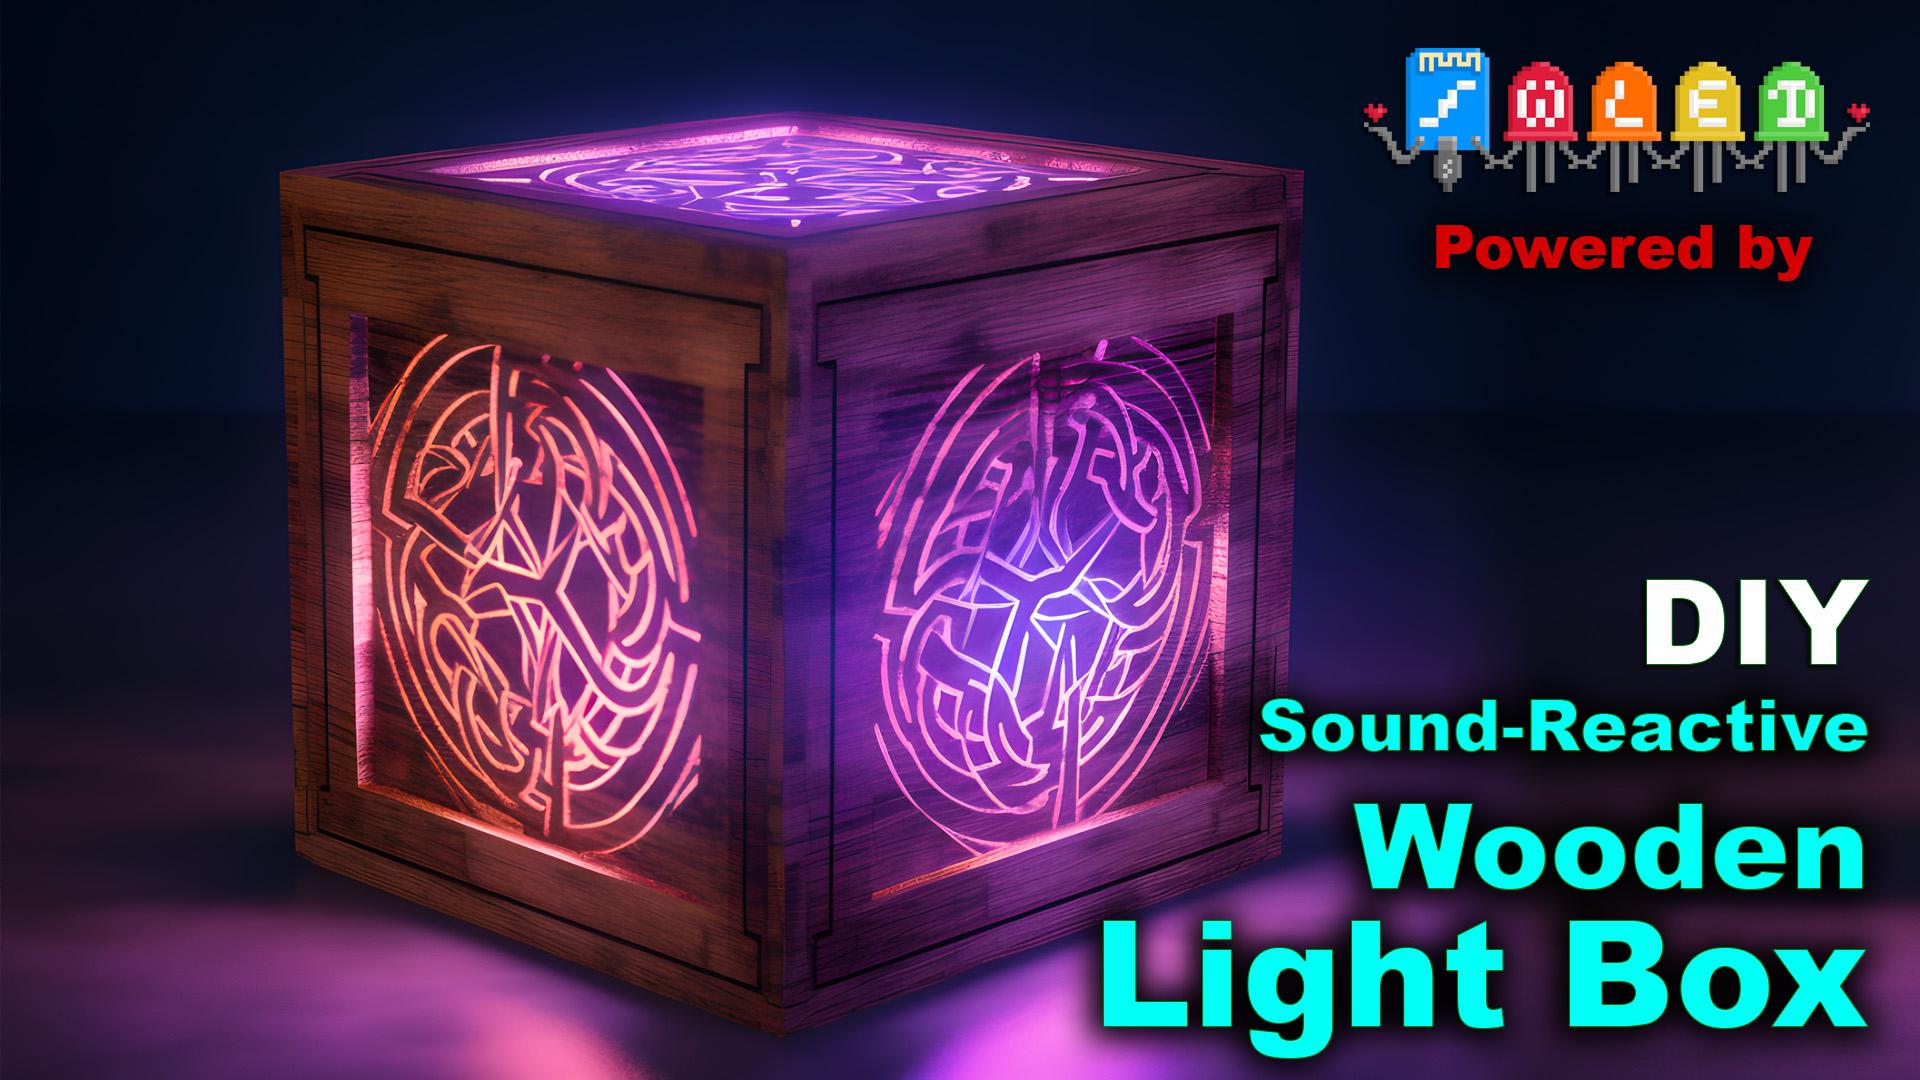 Gothic Wooden Desk Lamp Box, Color Changing LED, Music Reactive, Laser Cutting, WLED